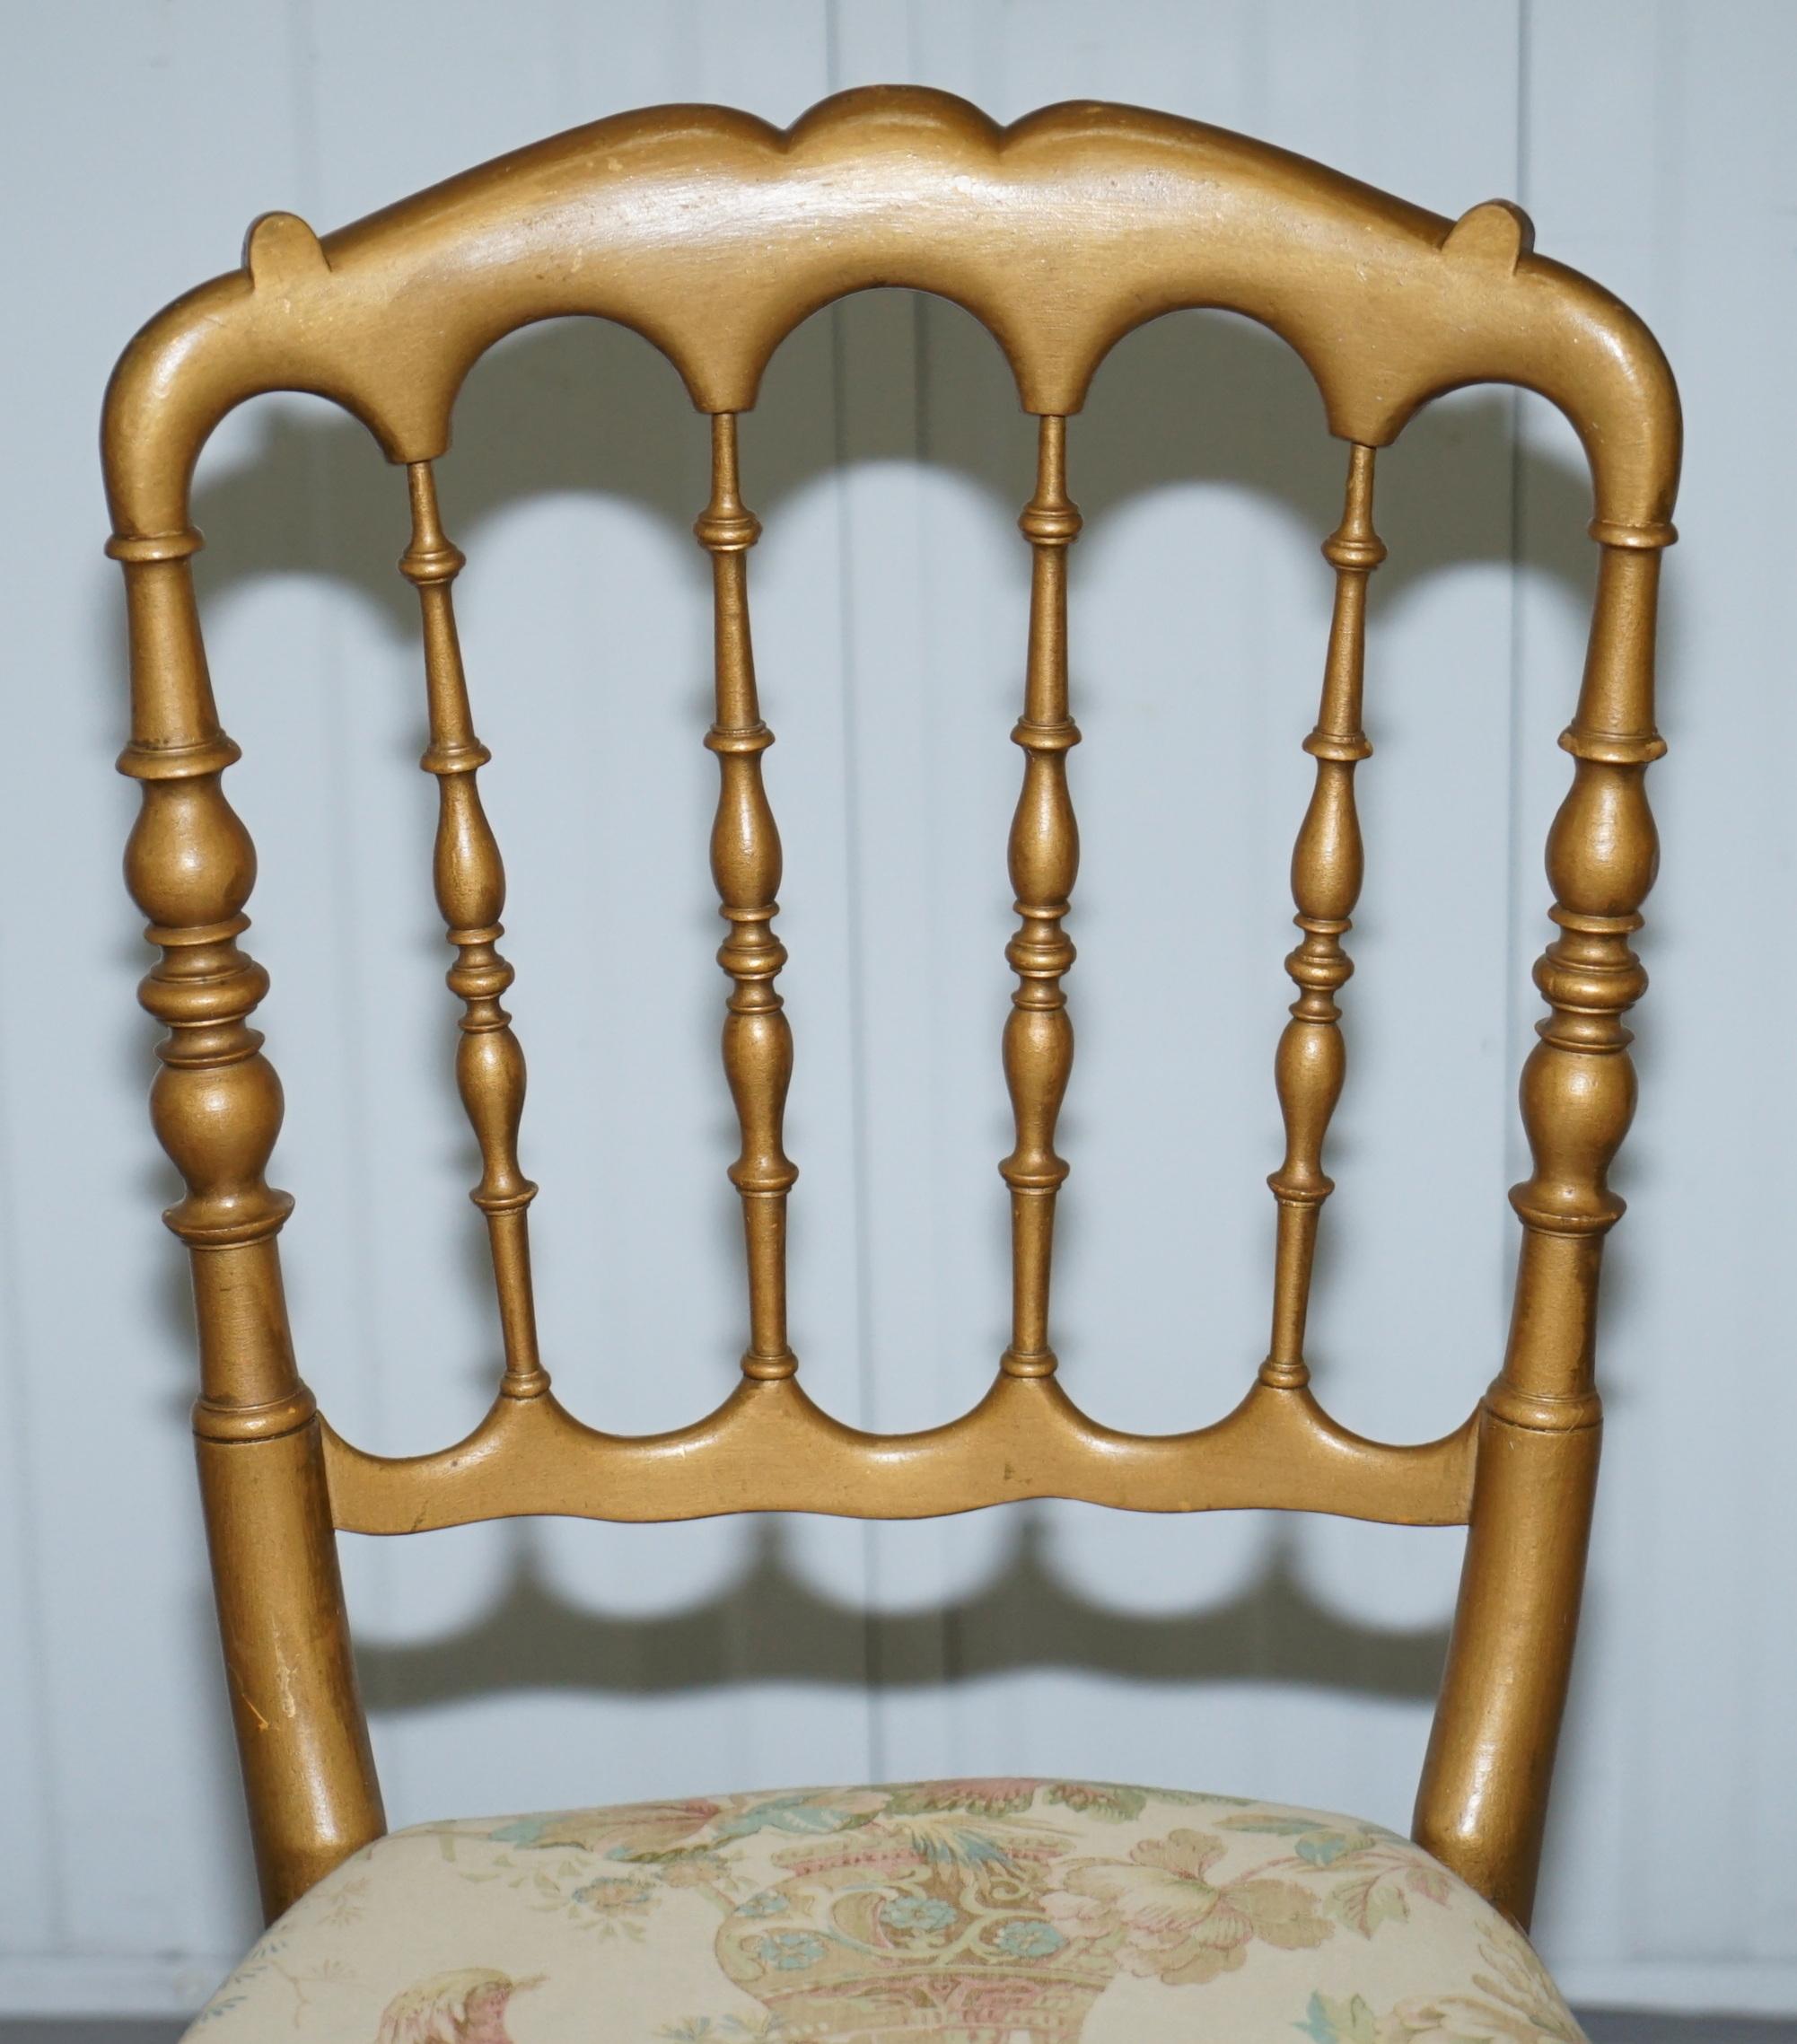 Early 20th Century Regency Style Gold Giltwood Spindle Chair circa 1900 Ornate Bird Upholstery For Sale